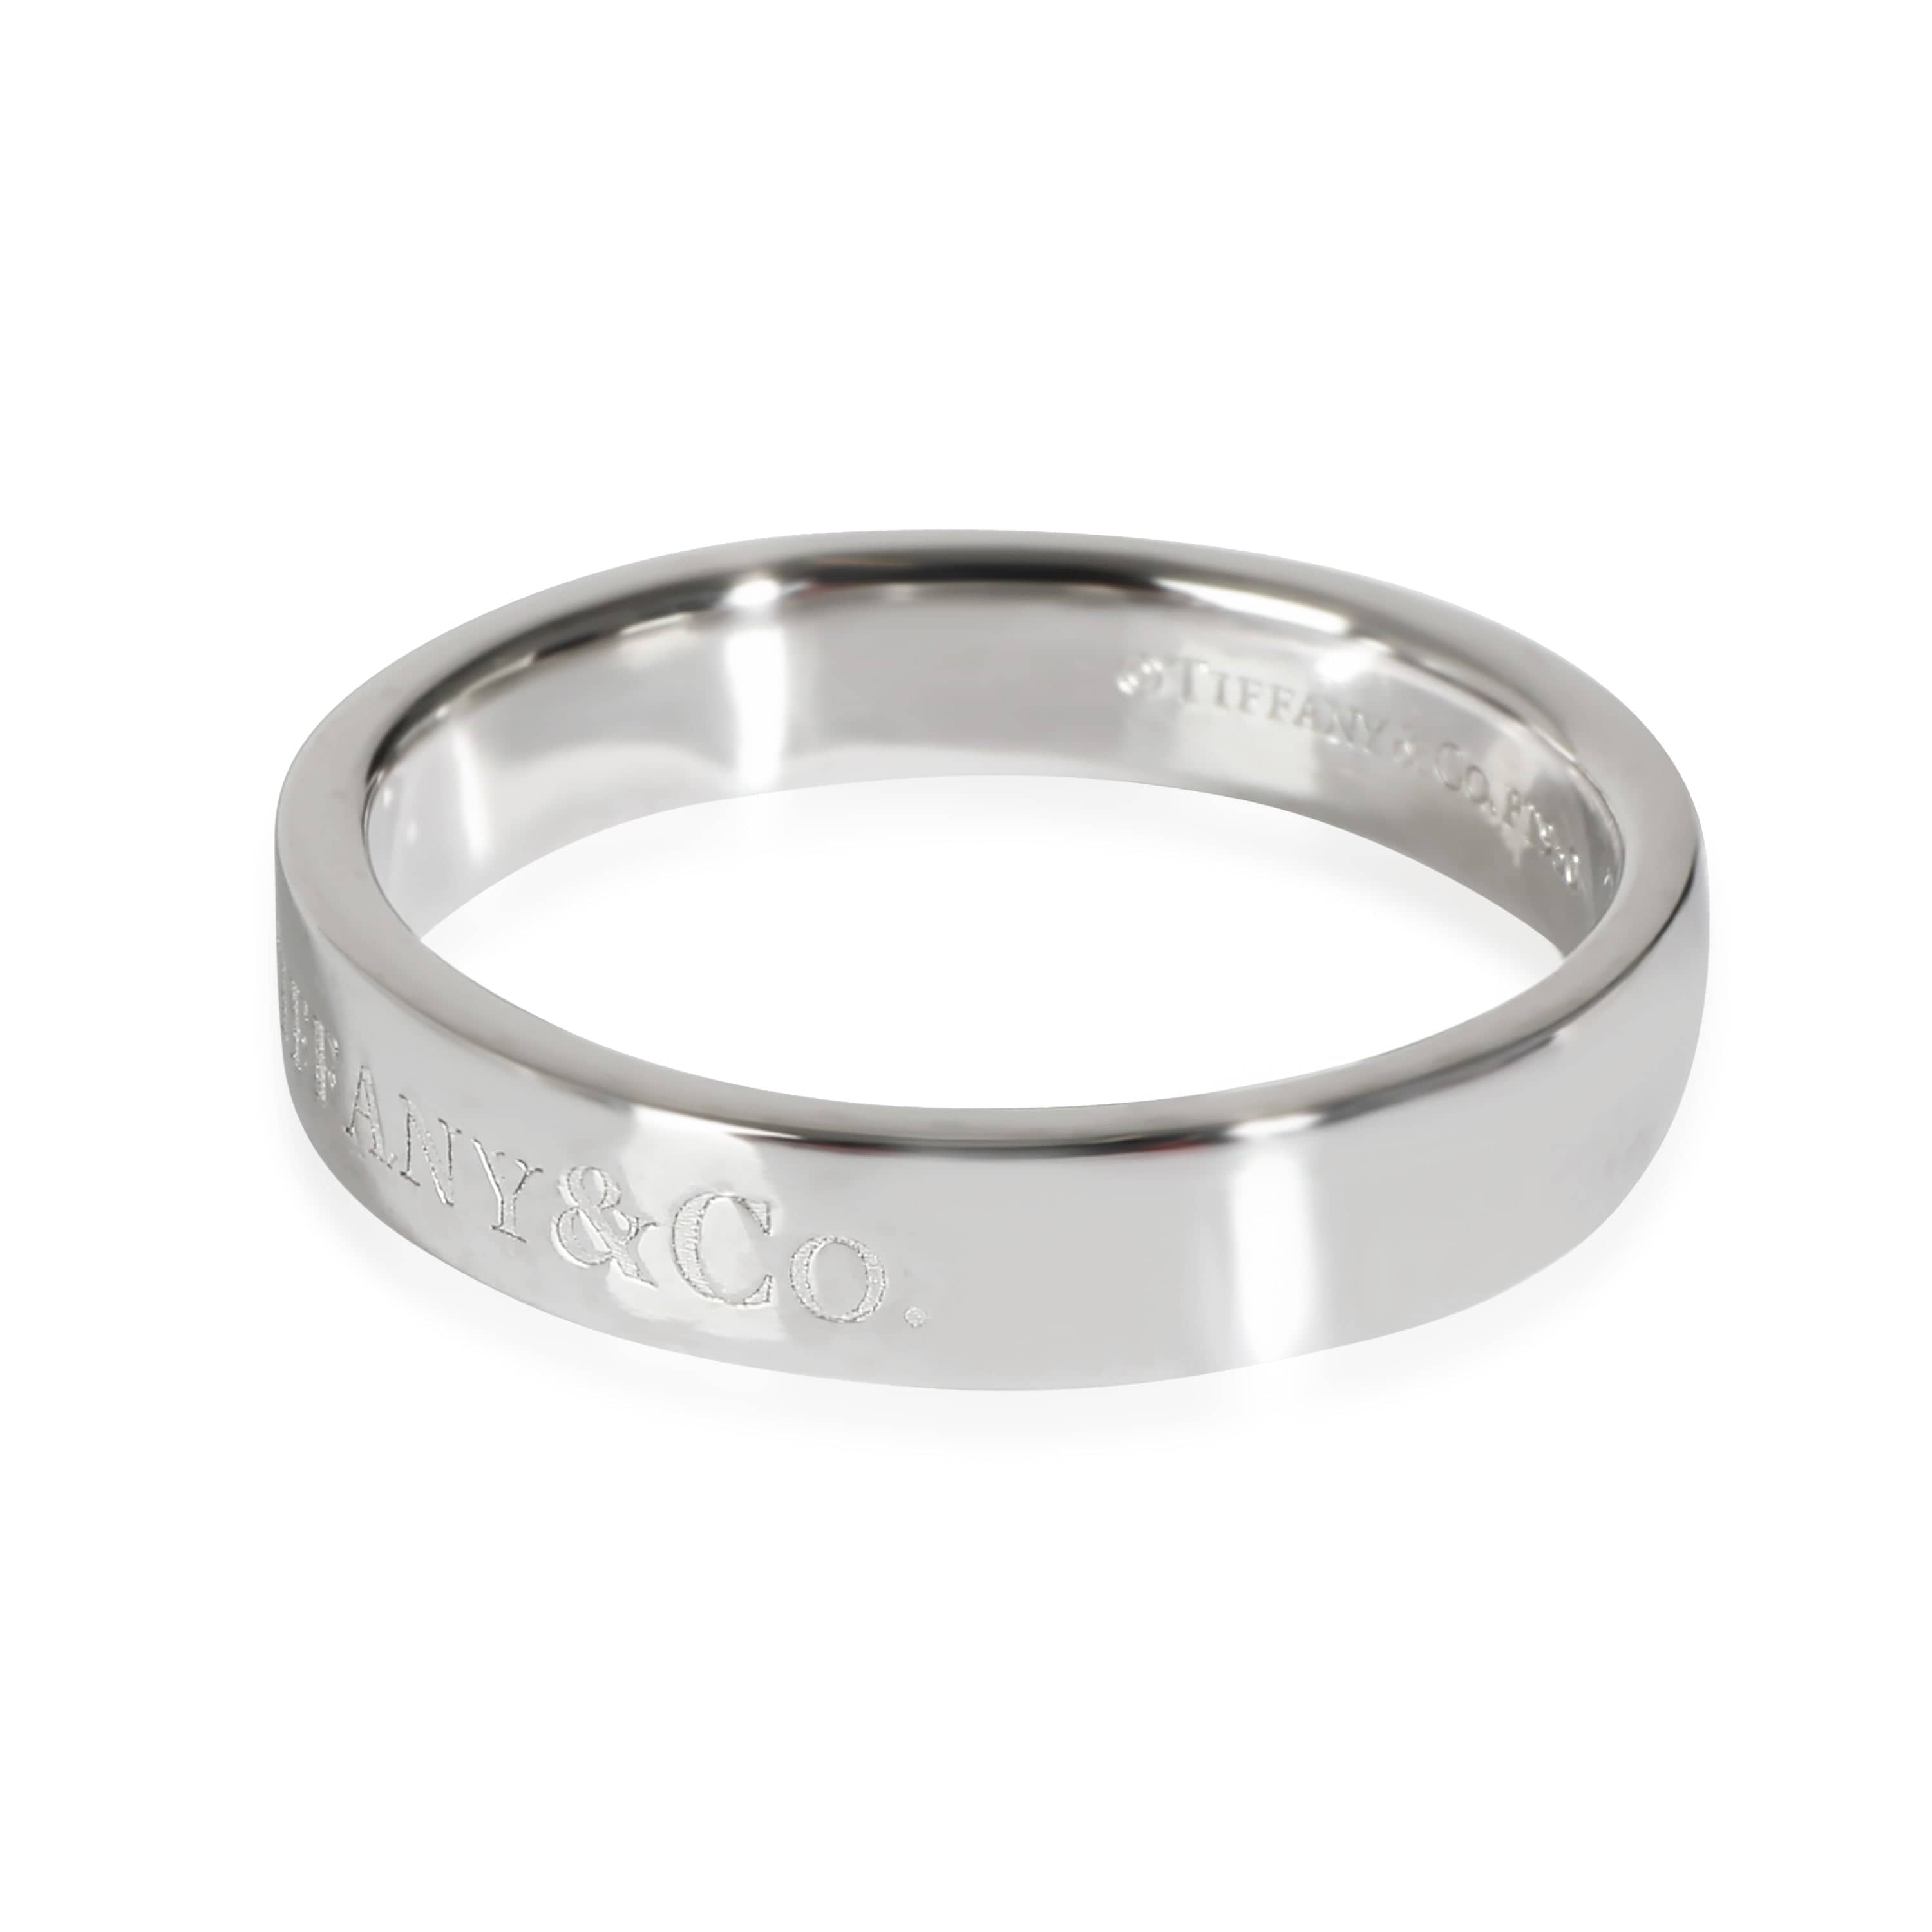 Tiffany & Co. Band Ring in Platinum, 4mm